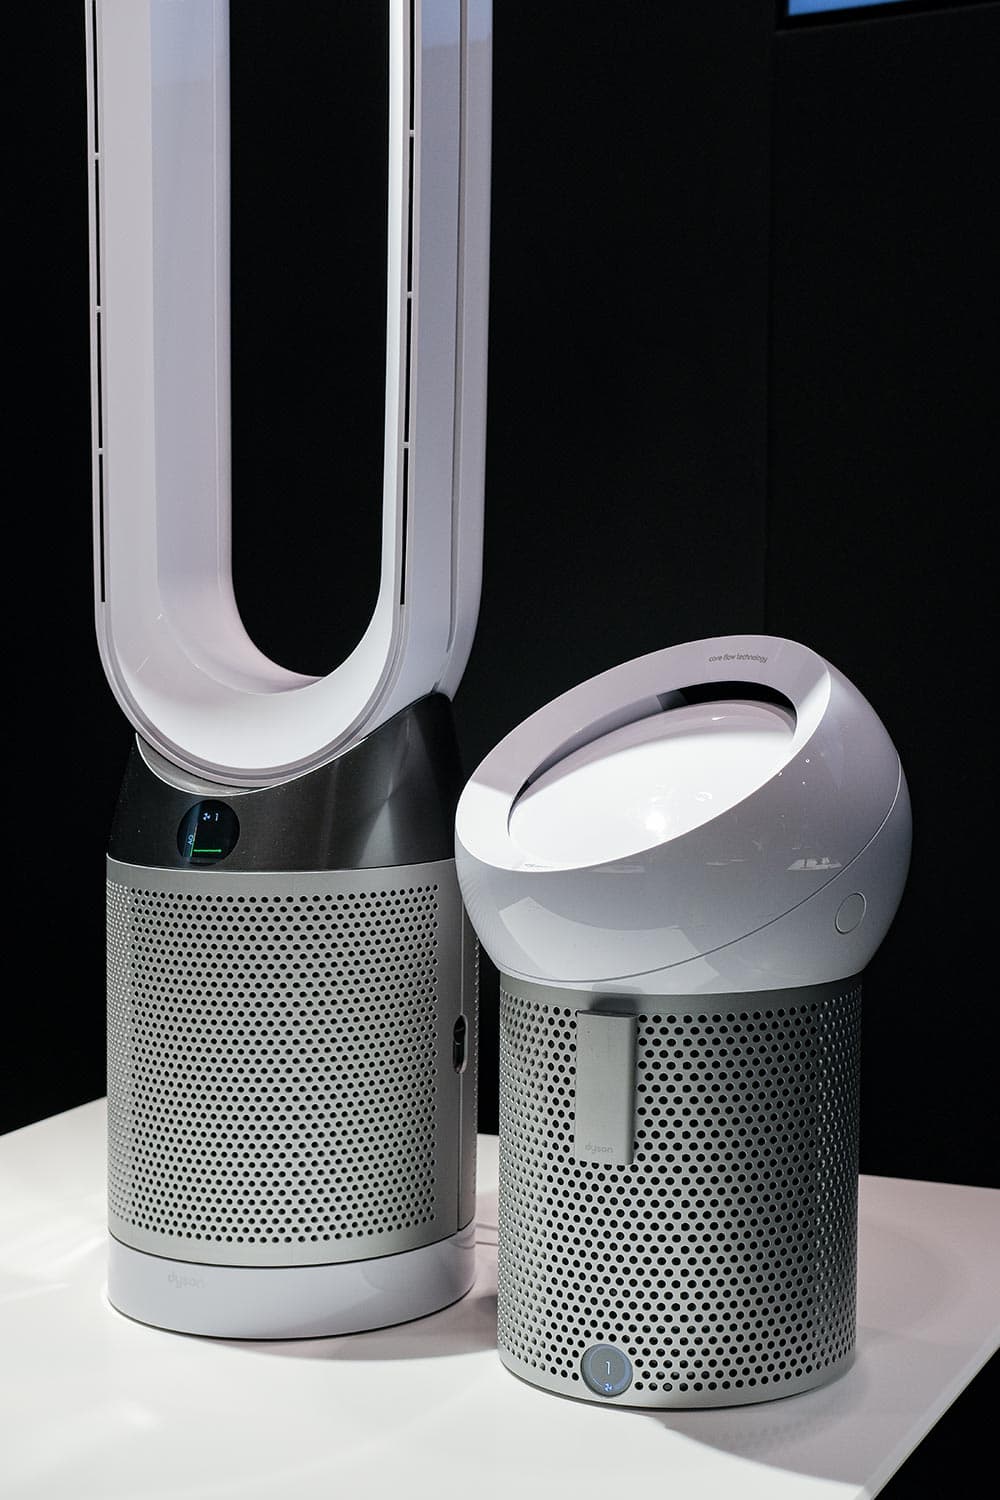 High-tech and modern home appliances and beauty tools Dyson